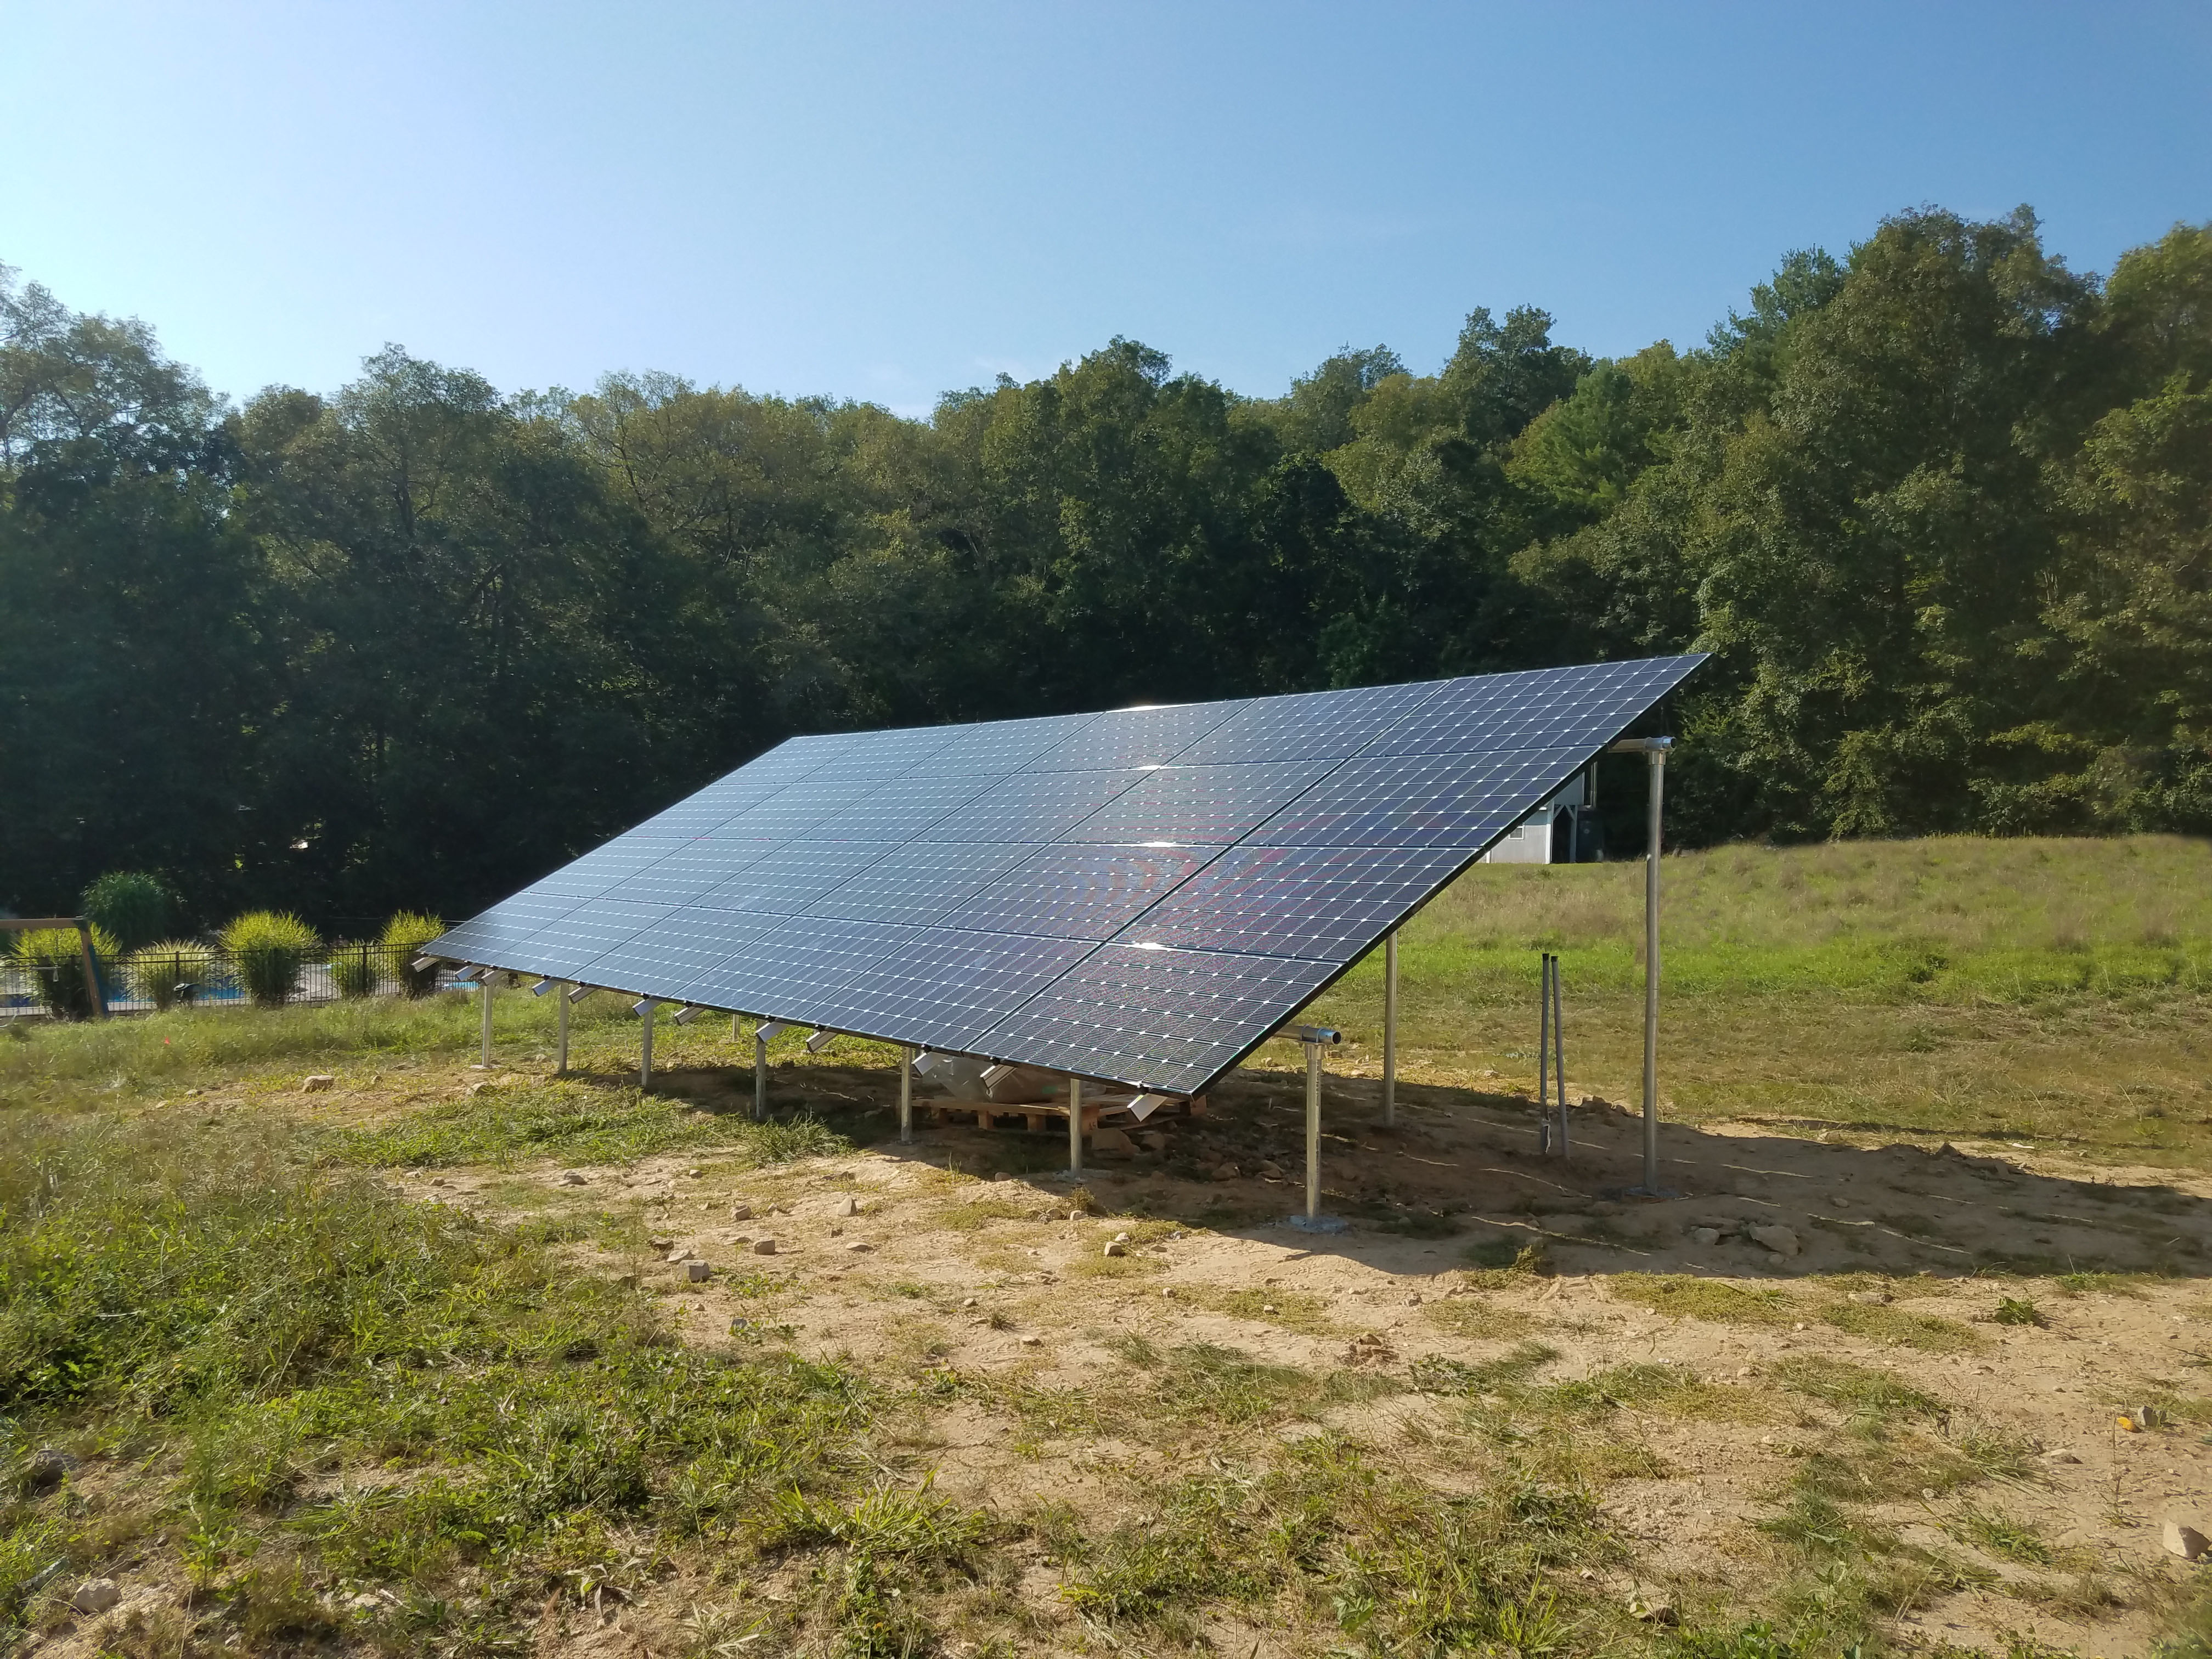 This 8.04 kW ground mounted system was installed in Dudley, MA and features 335 watt LG Panels and a SolarEdge inverter.